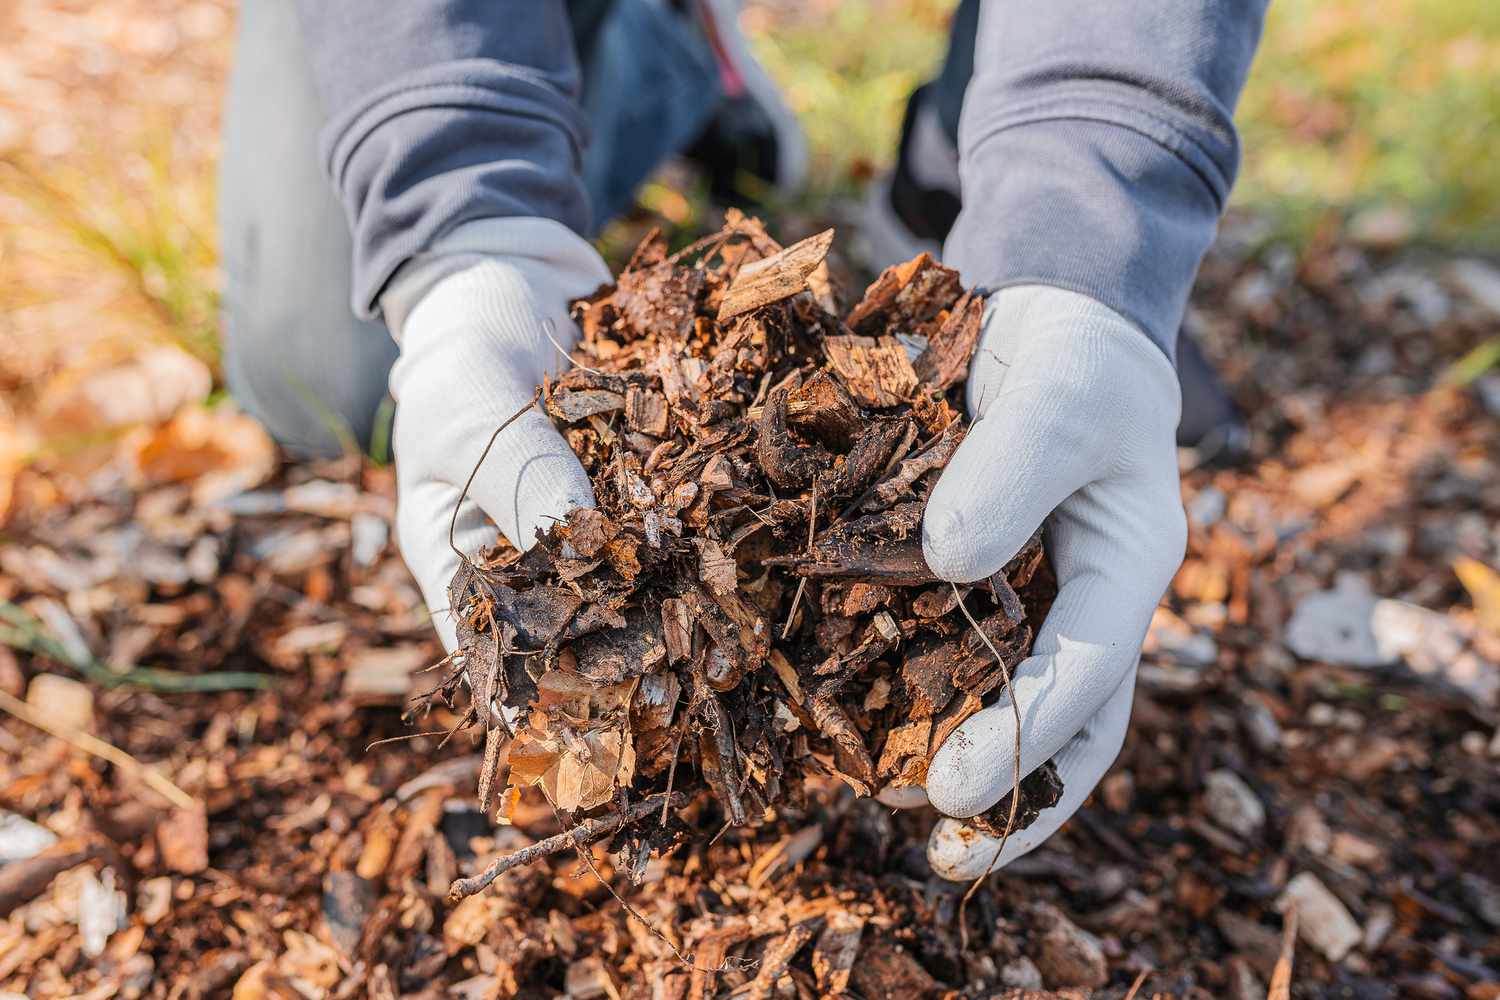 How To Make Compost From Leaves